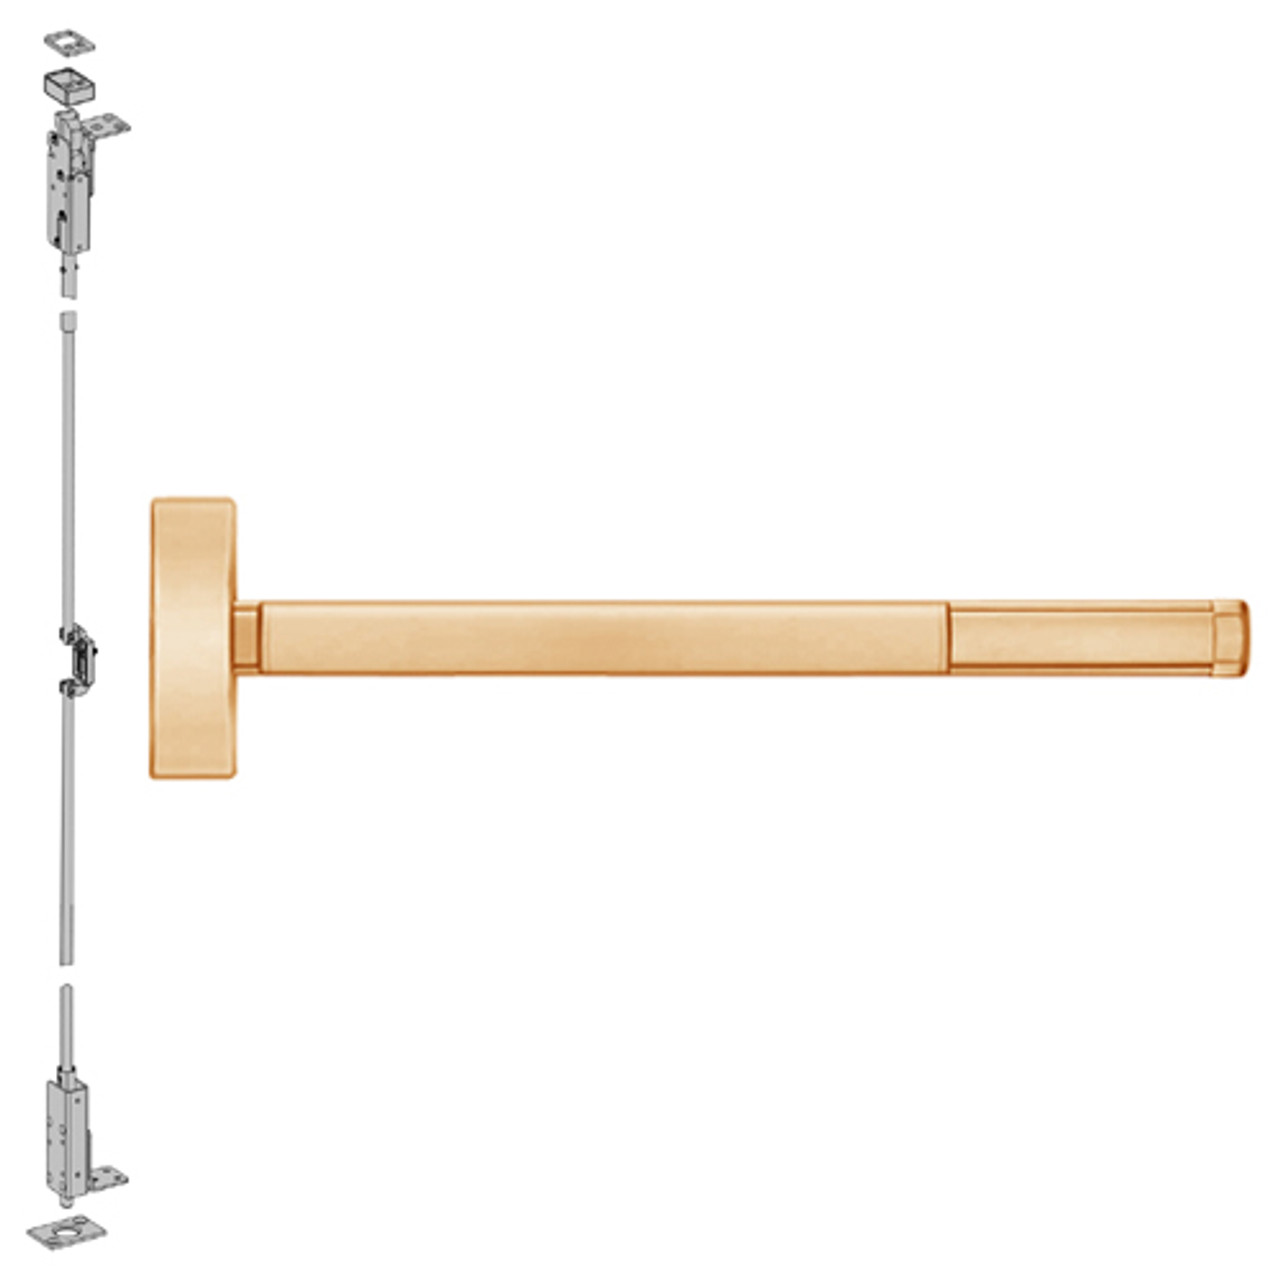 2715LBR-612-36 PHI 2700 Series Wood Door Concealed Vertical Rod Device Prepped for Thumbpiece Always Active with Less Bottom Rod in Satin Bronze Finish